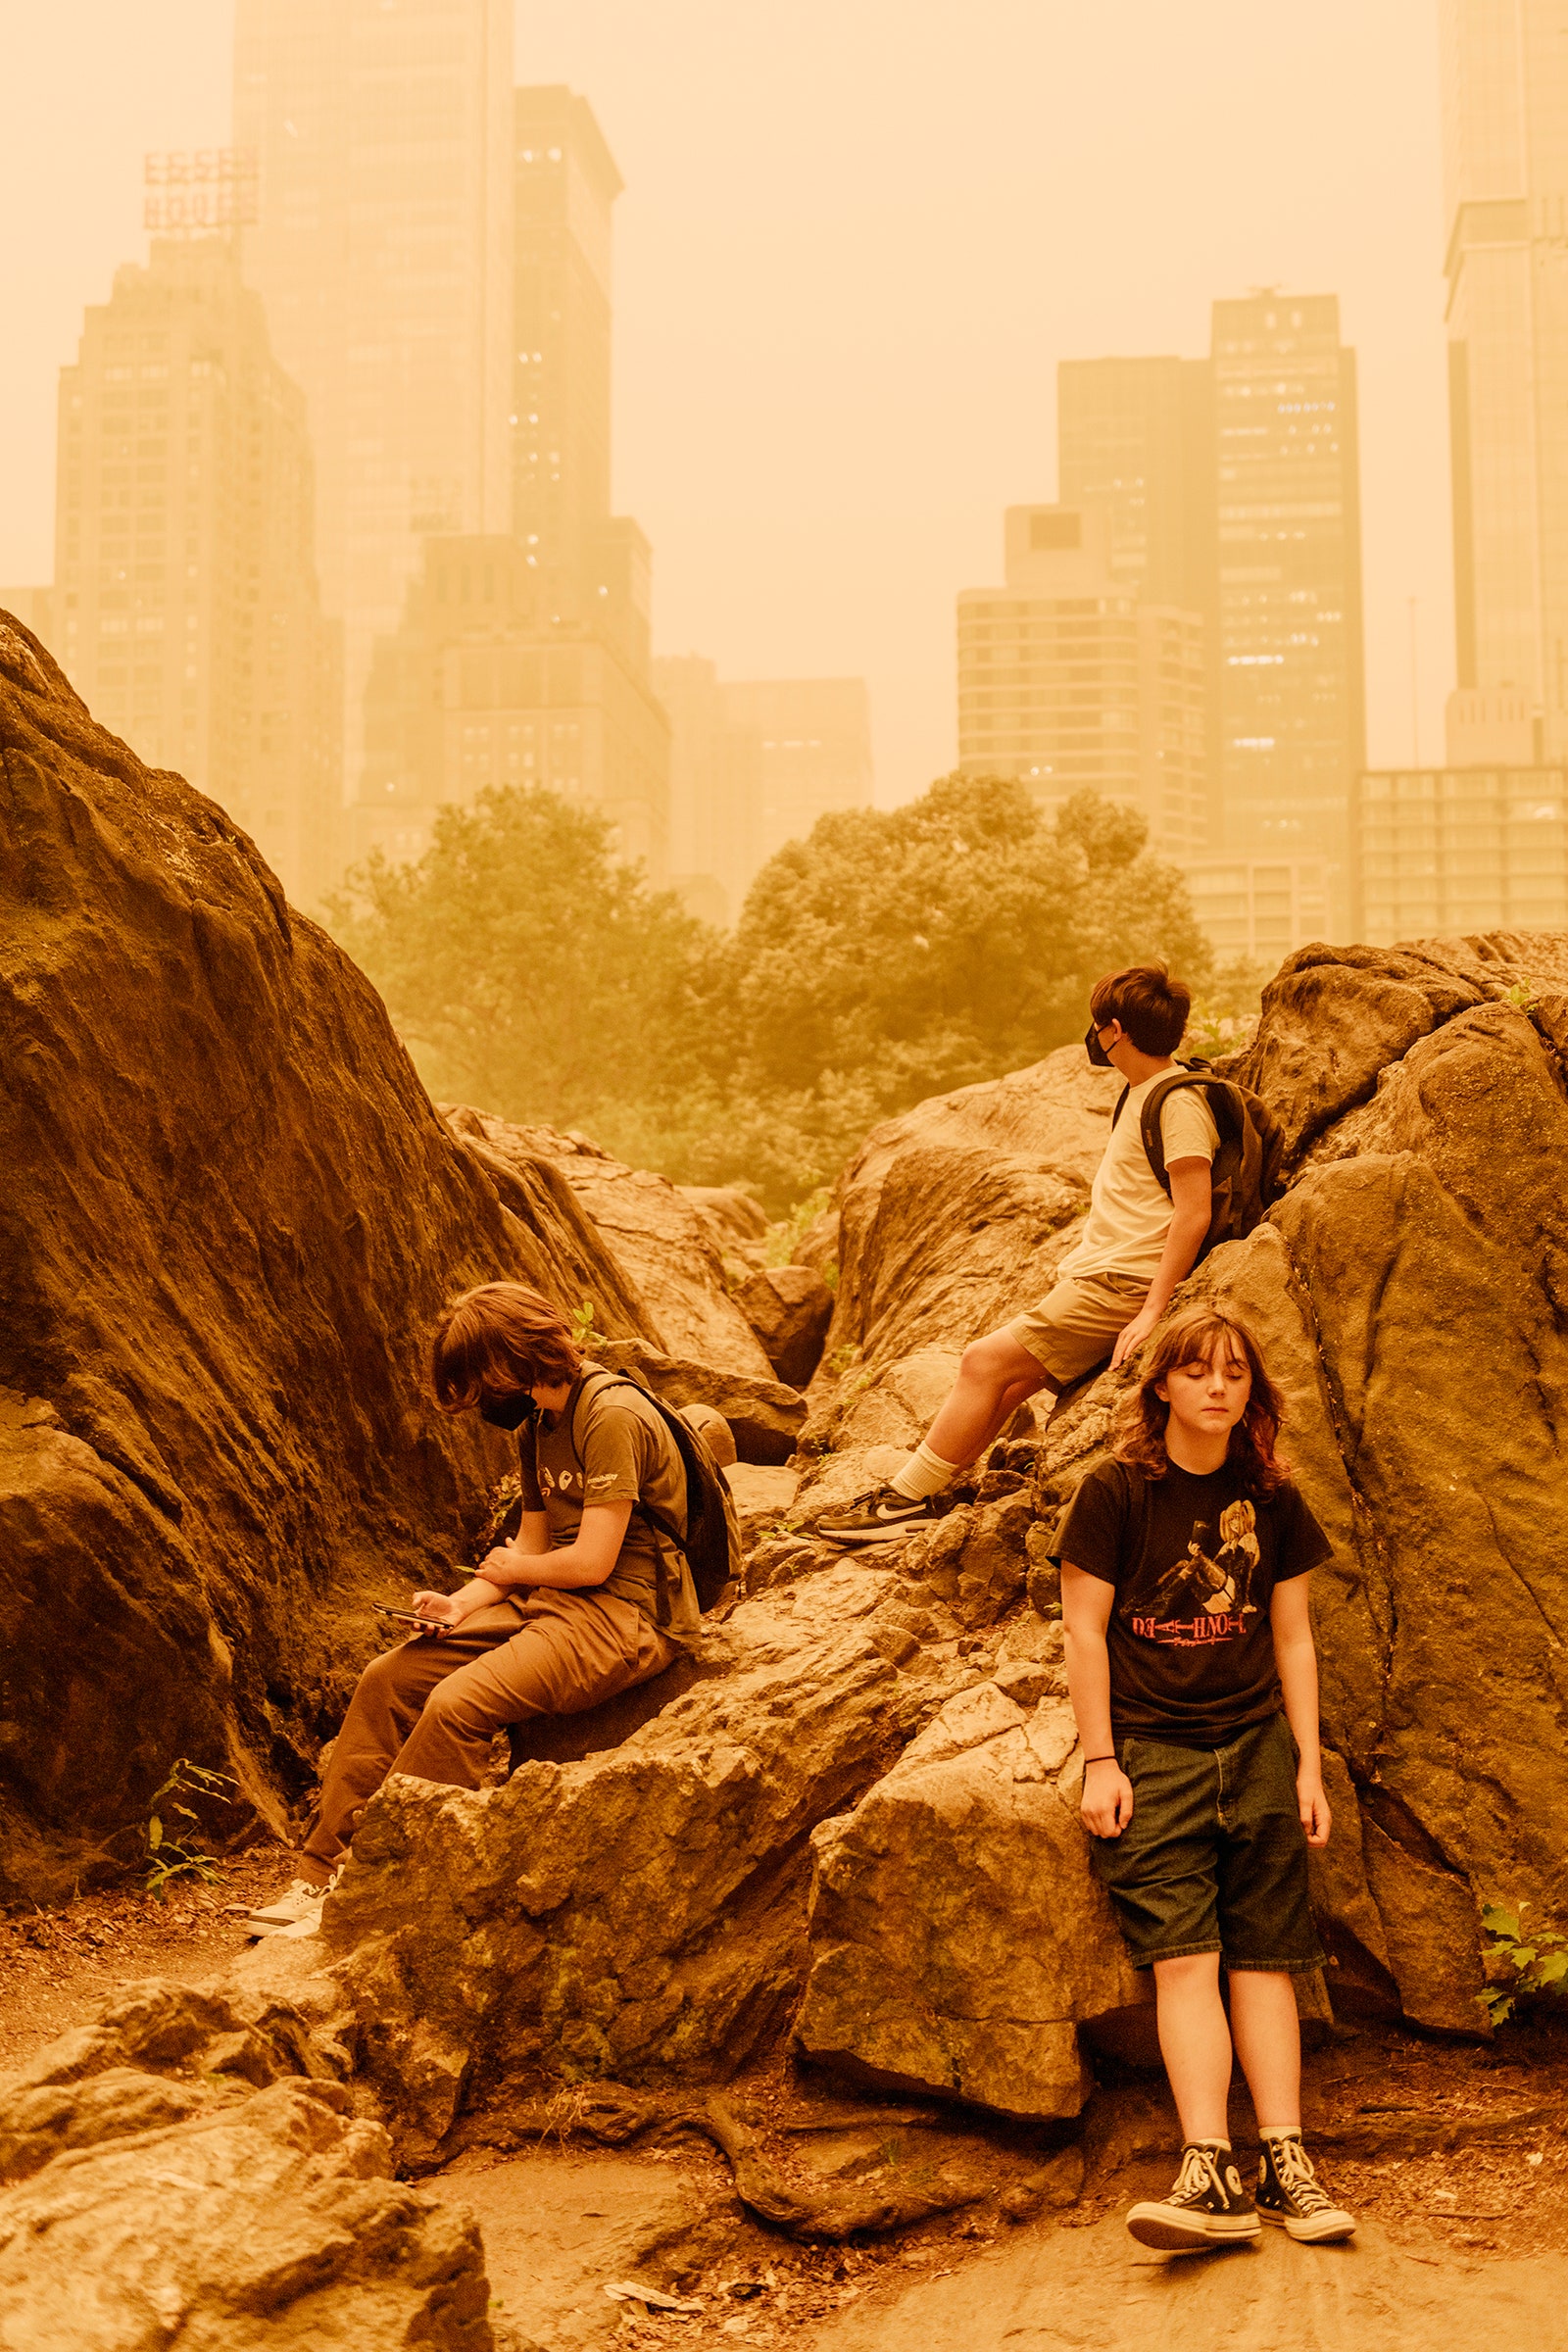 Chatting the Pictures: NYC’s Children of the Smoke